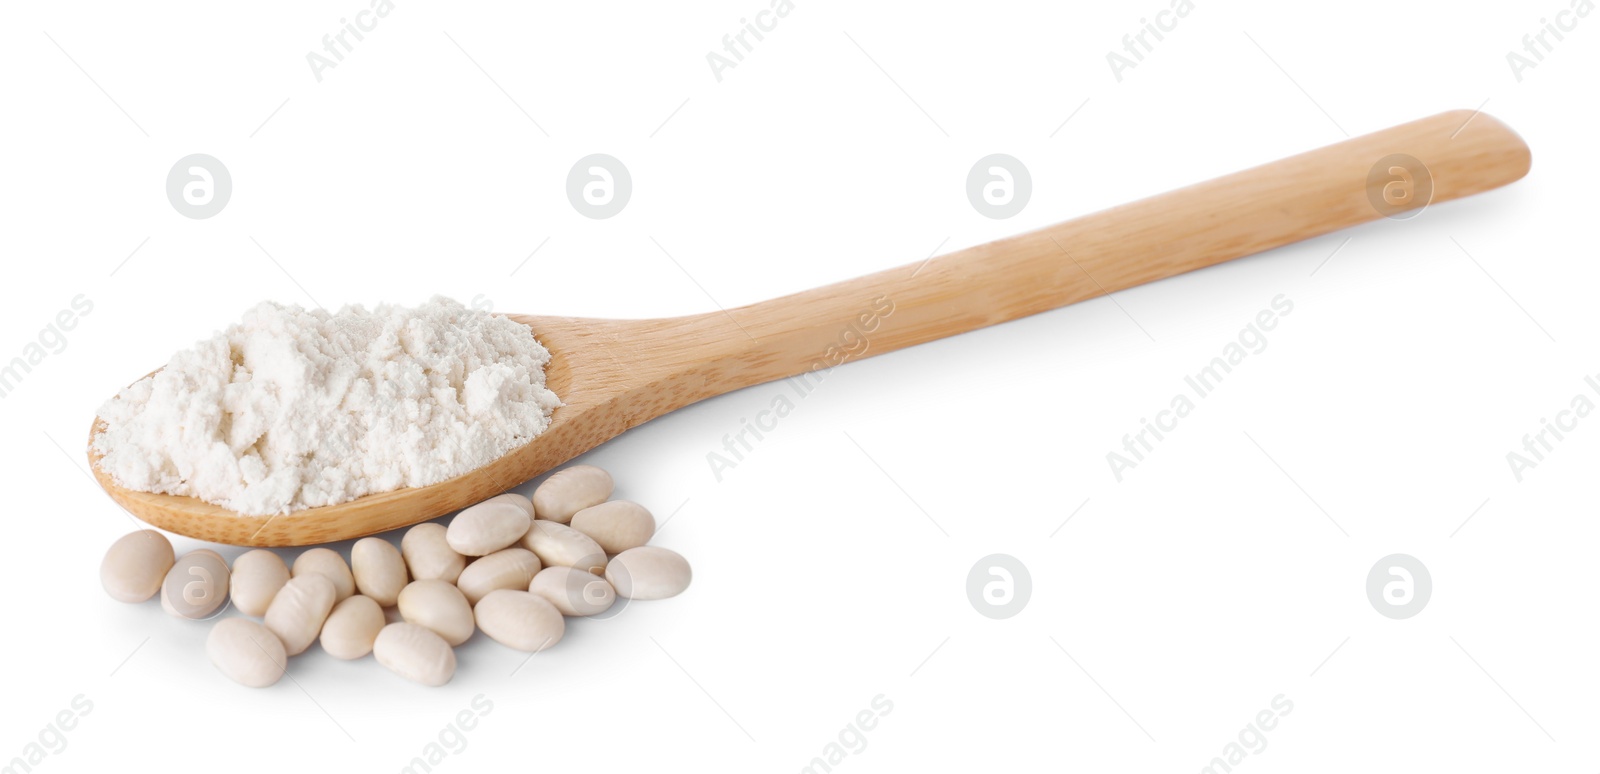 Photo of Wooden spoon with flour and kidney beans isolated on white